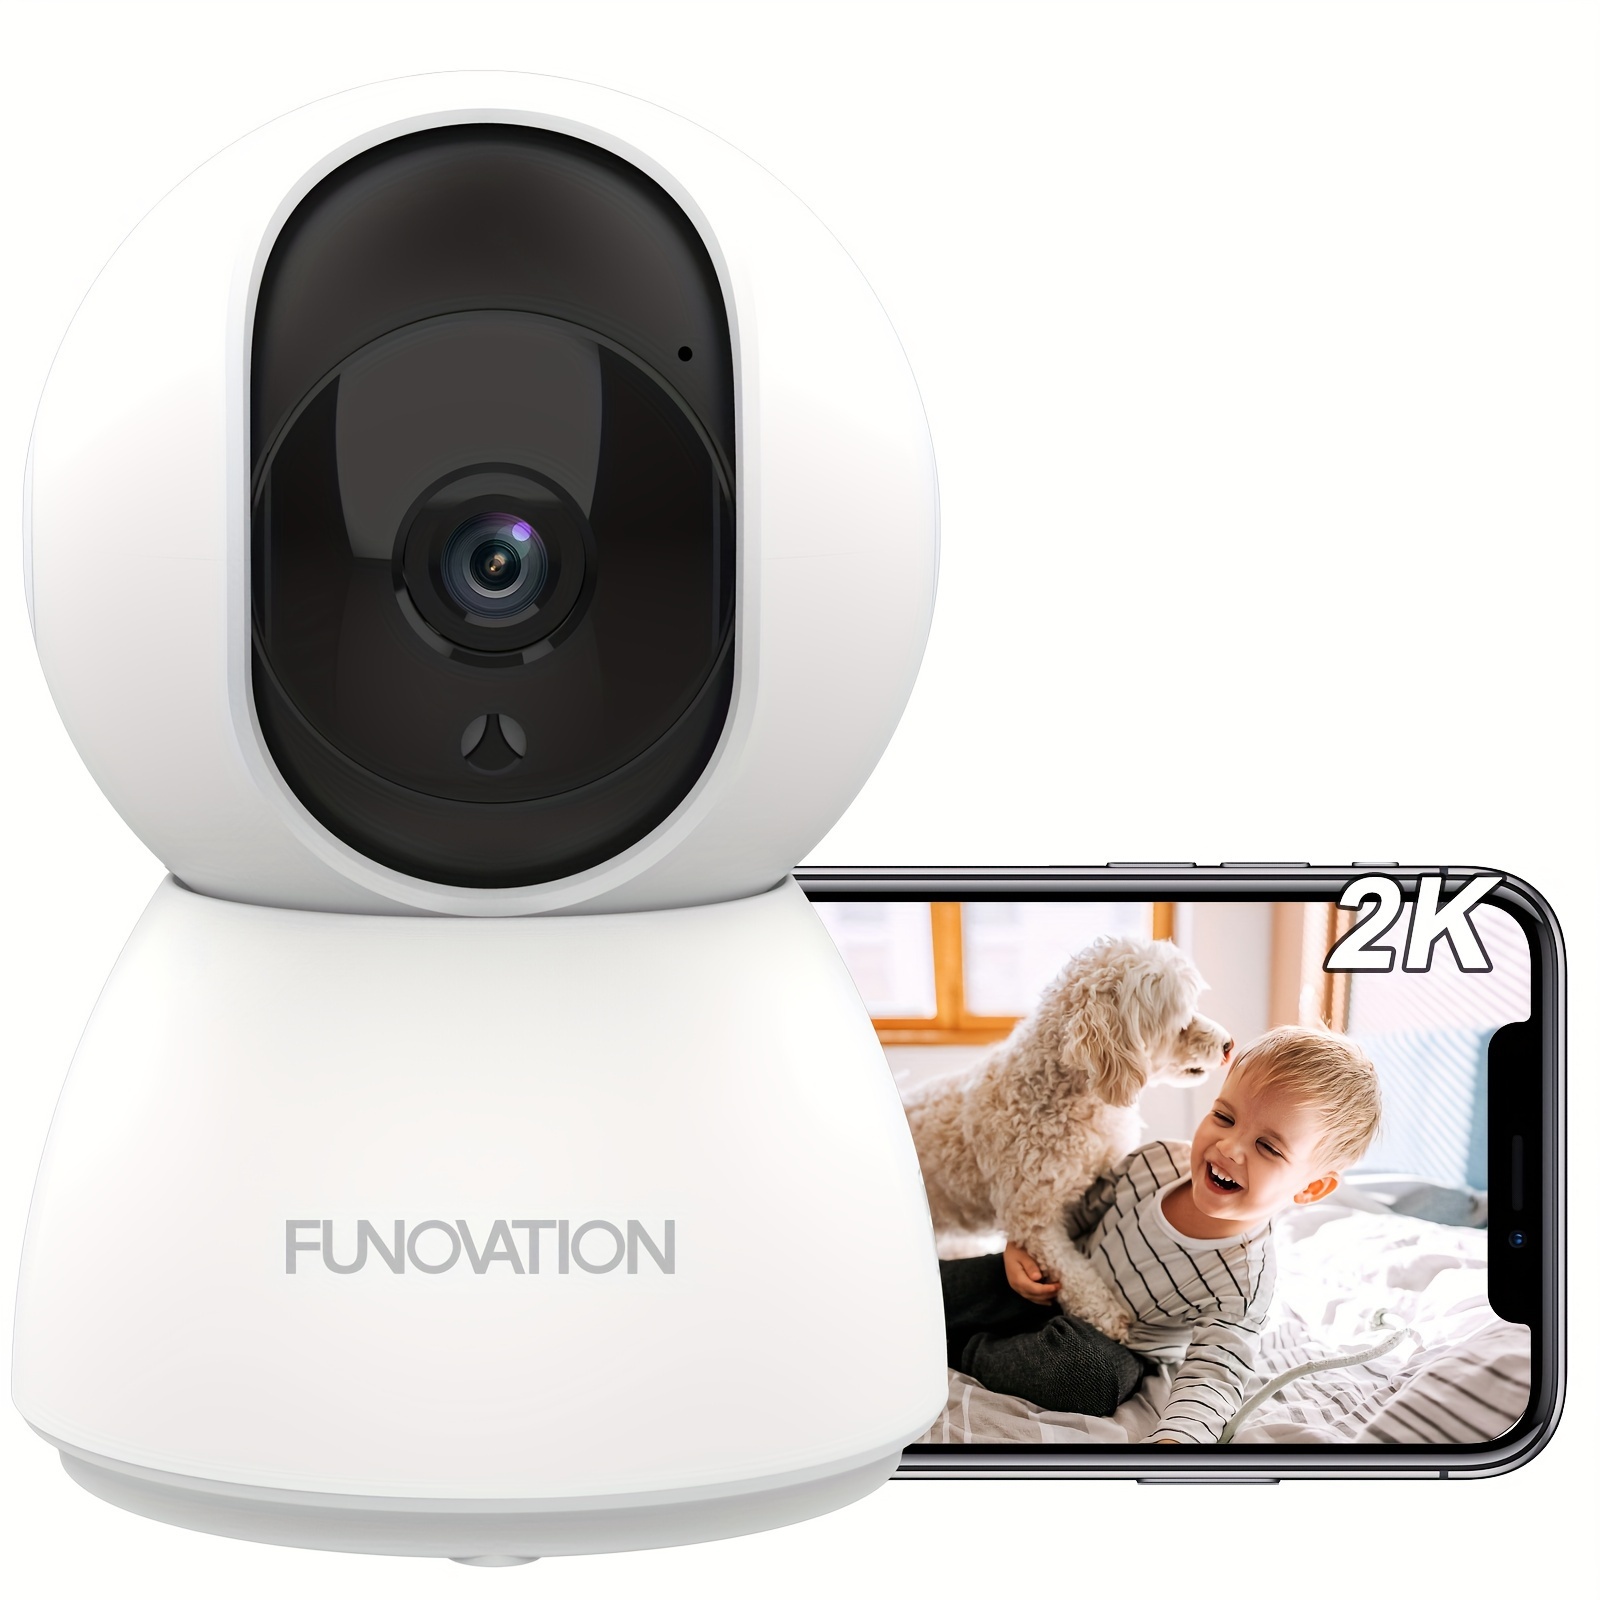 Xiaomi Mi 360 ° Home Security Camera 2K, Surveillance Camera Baby Monitor,  360 Angle Video Night Vision, Human Detection with AI -6P Lens -Aperture